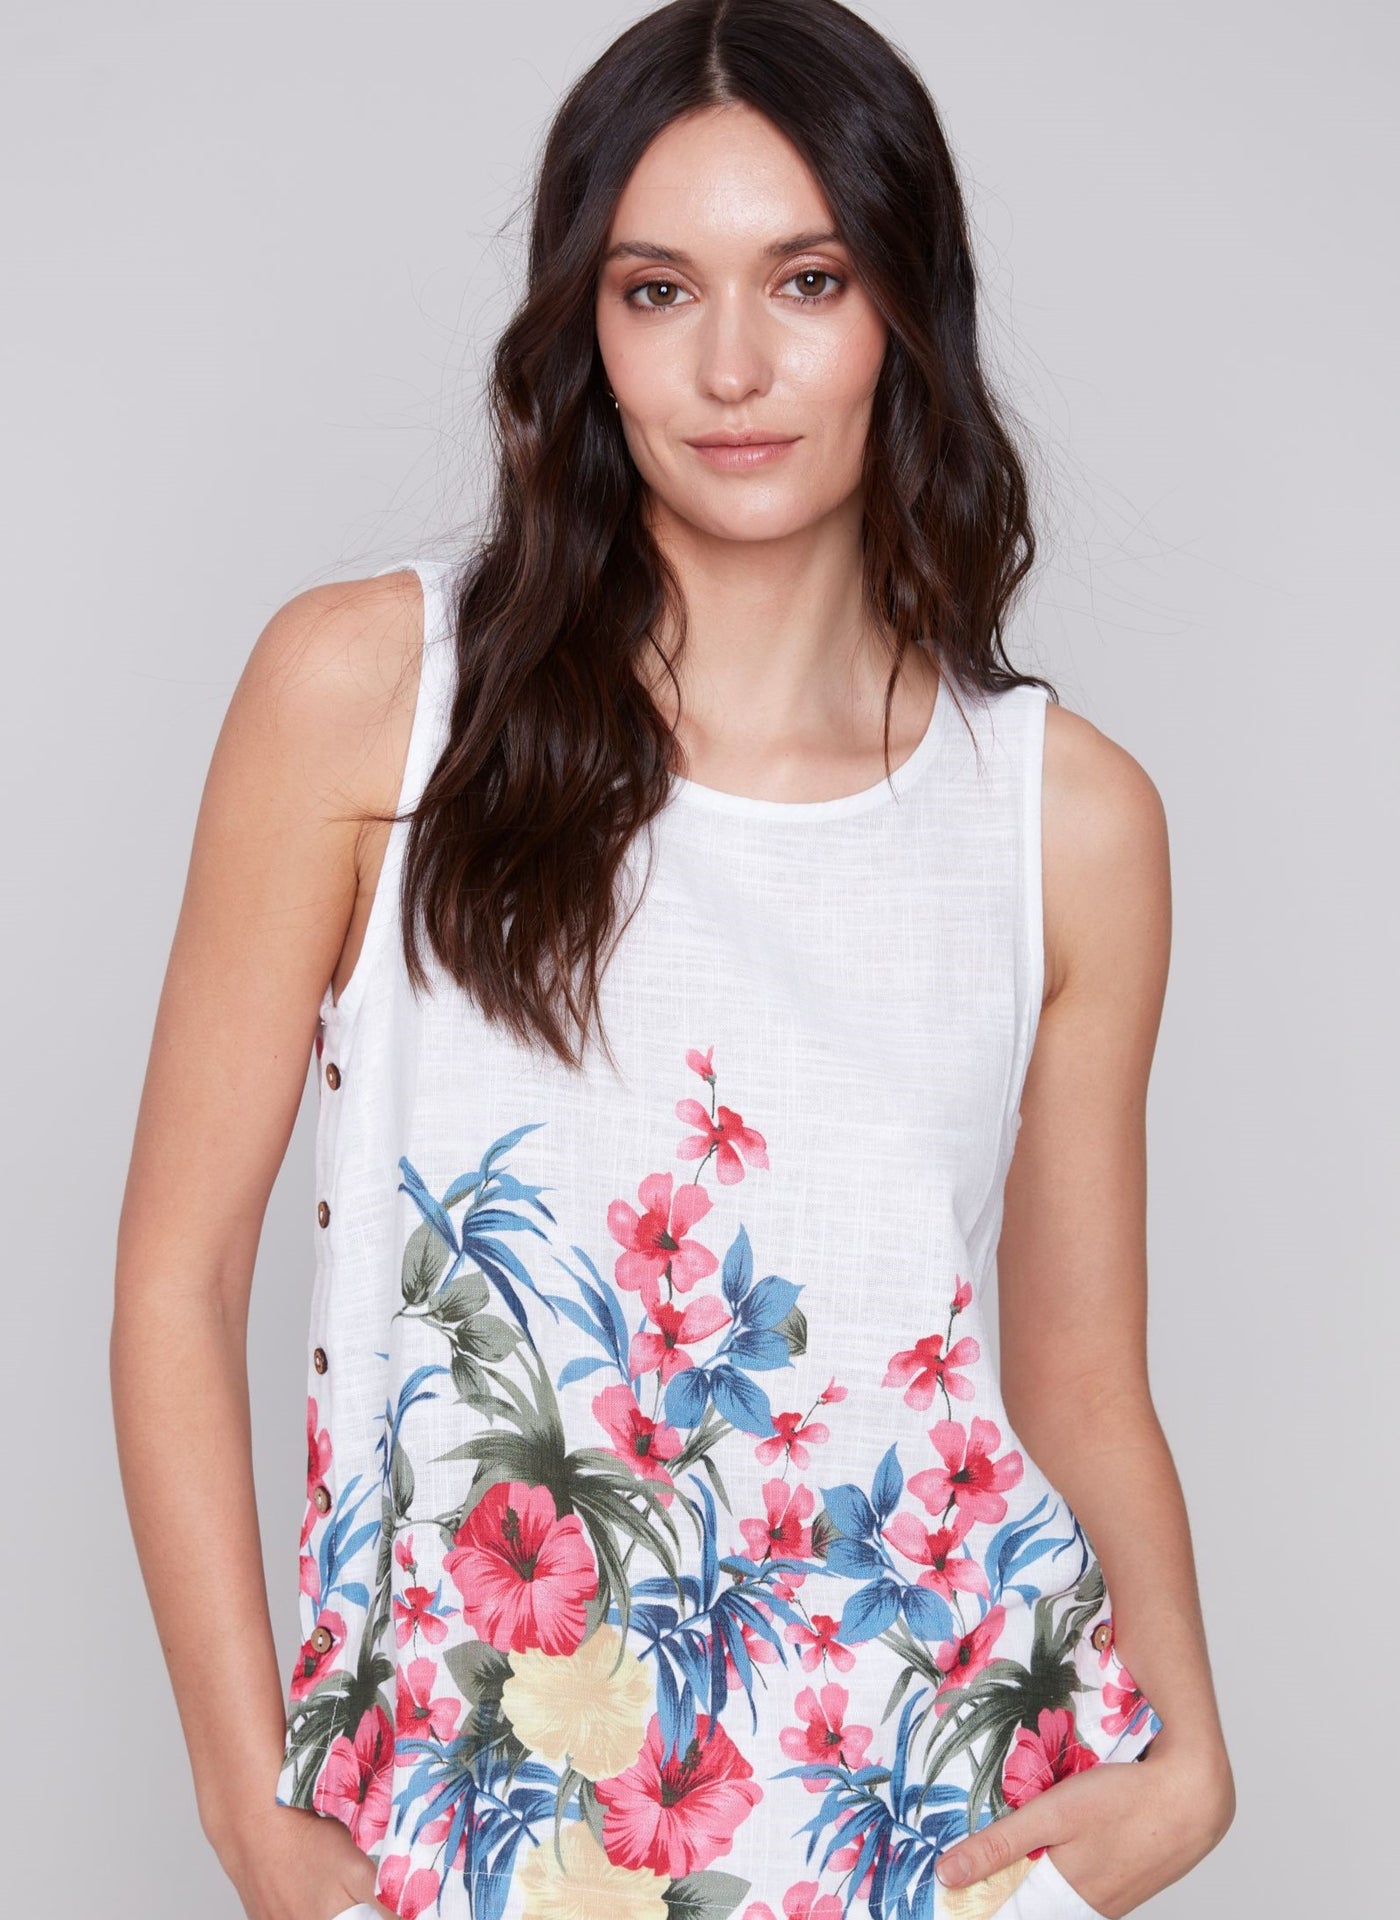 CHARLIE B SLEEVELESS FLORAL LINEN BLOUSE WITH SIDE BUTTONS